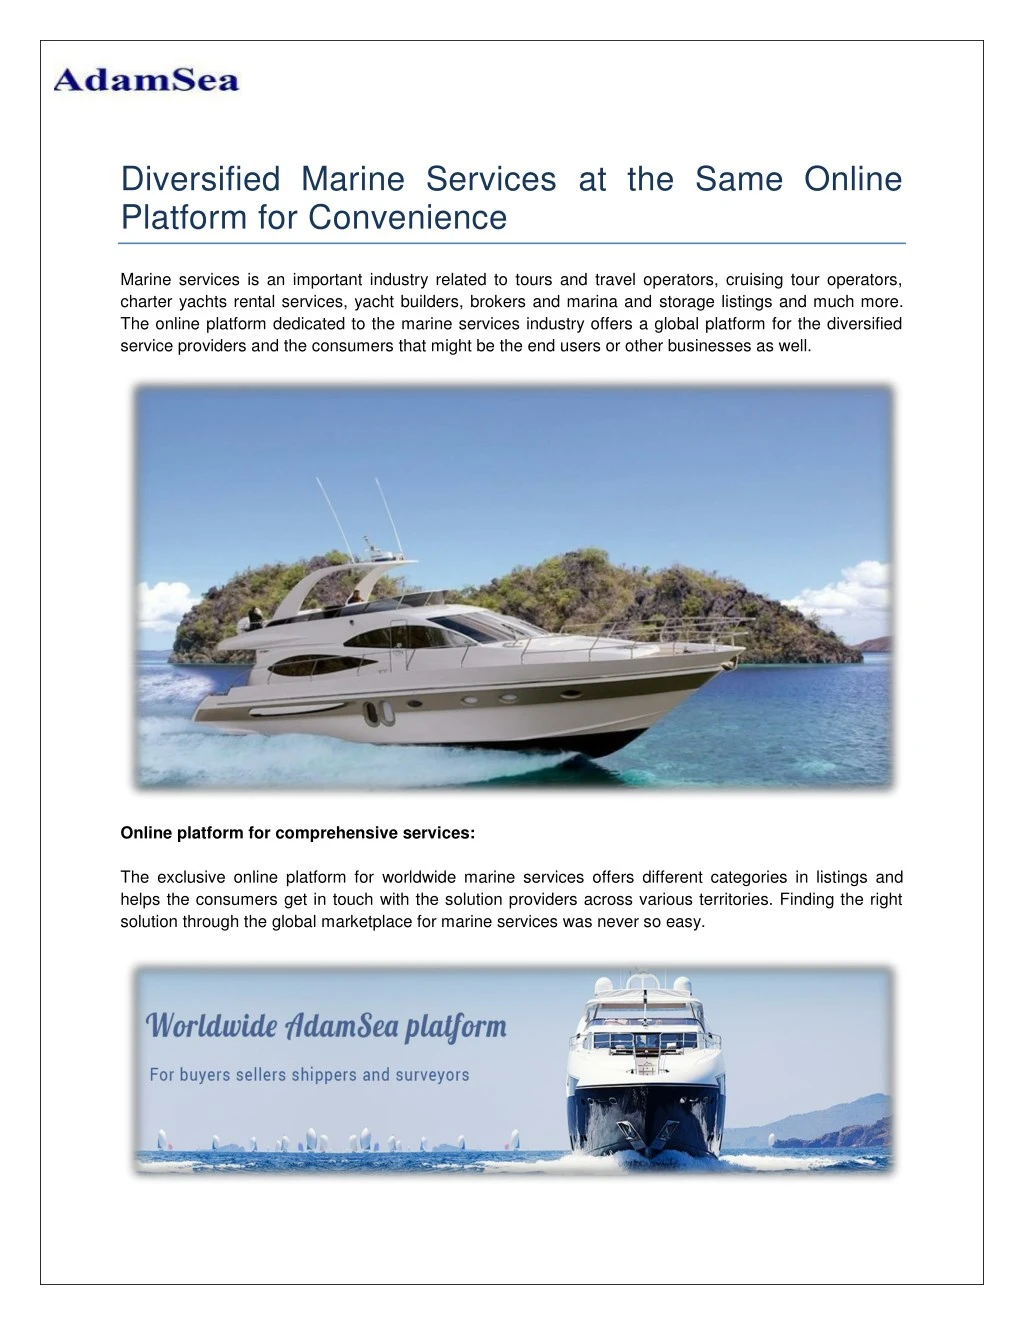 diversified marine services at the same online